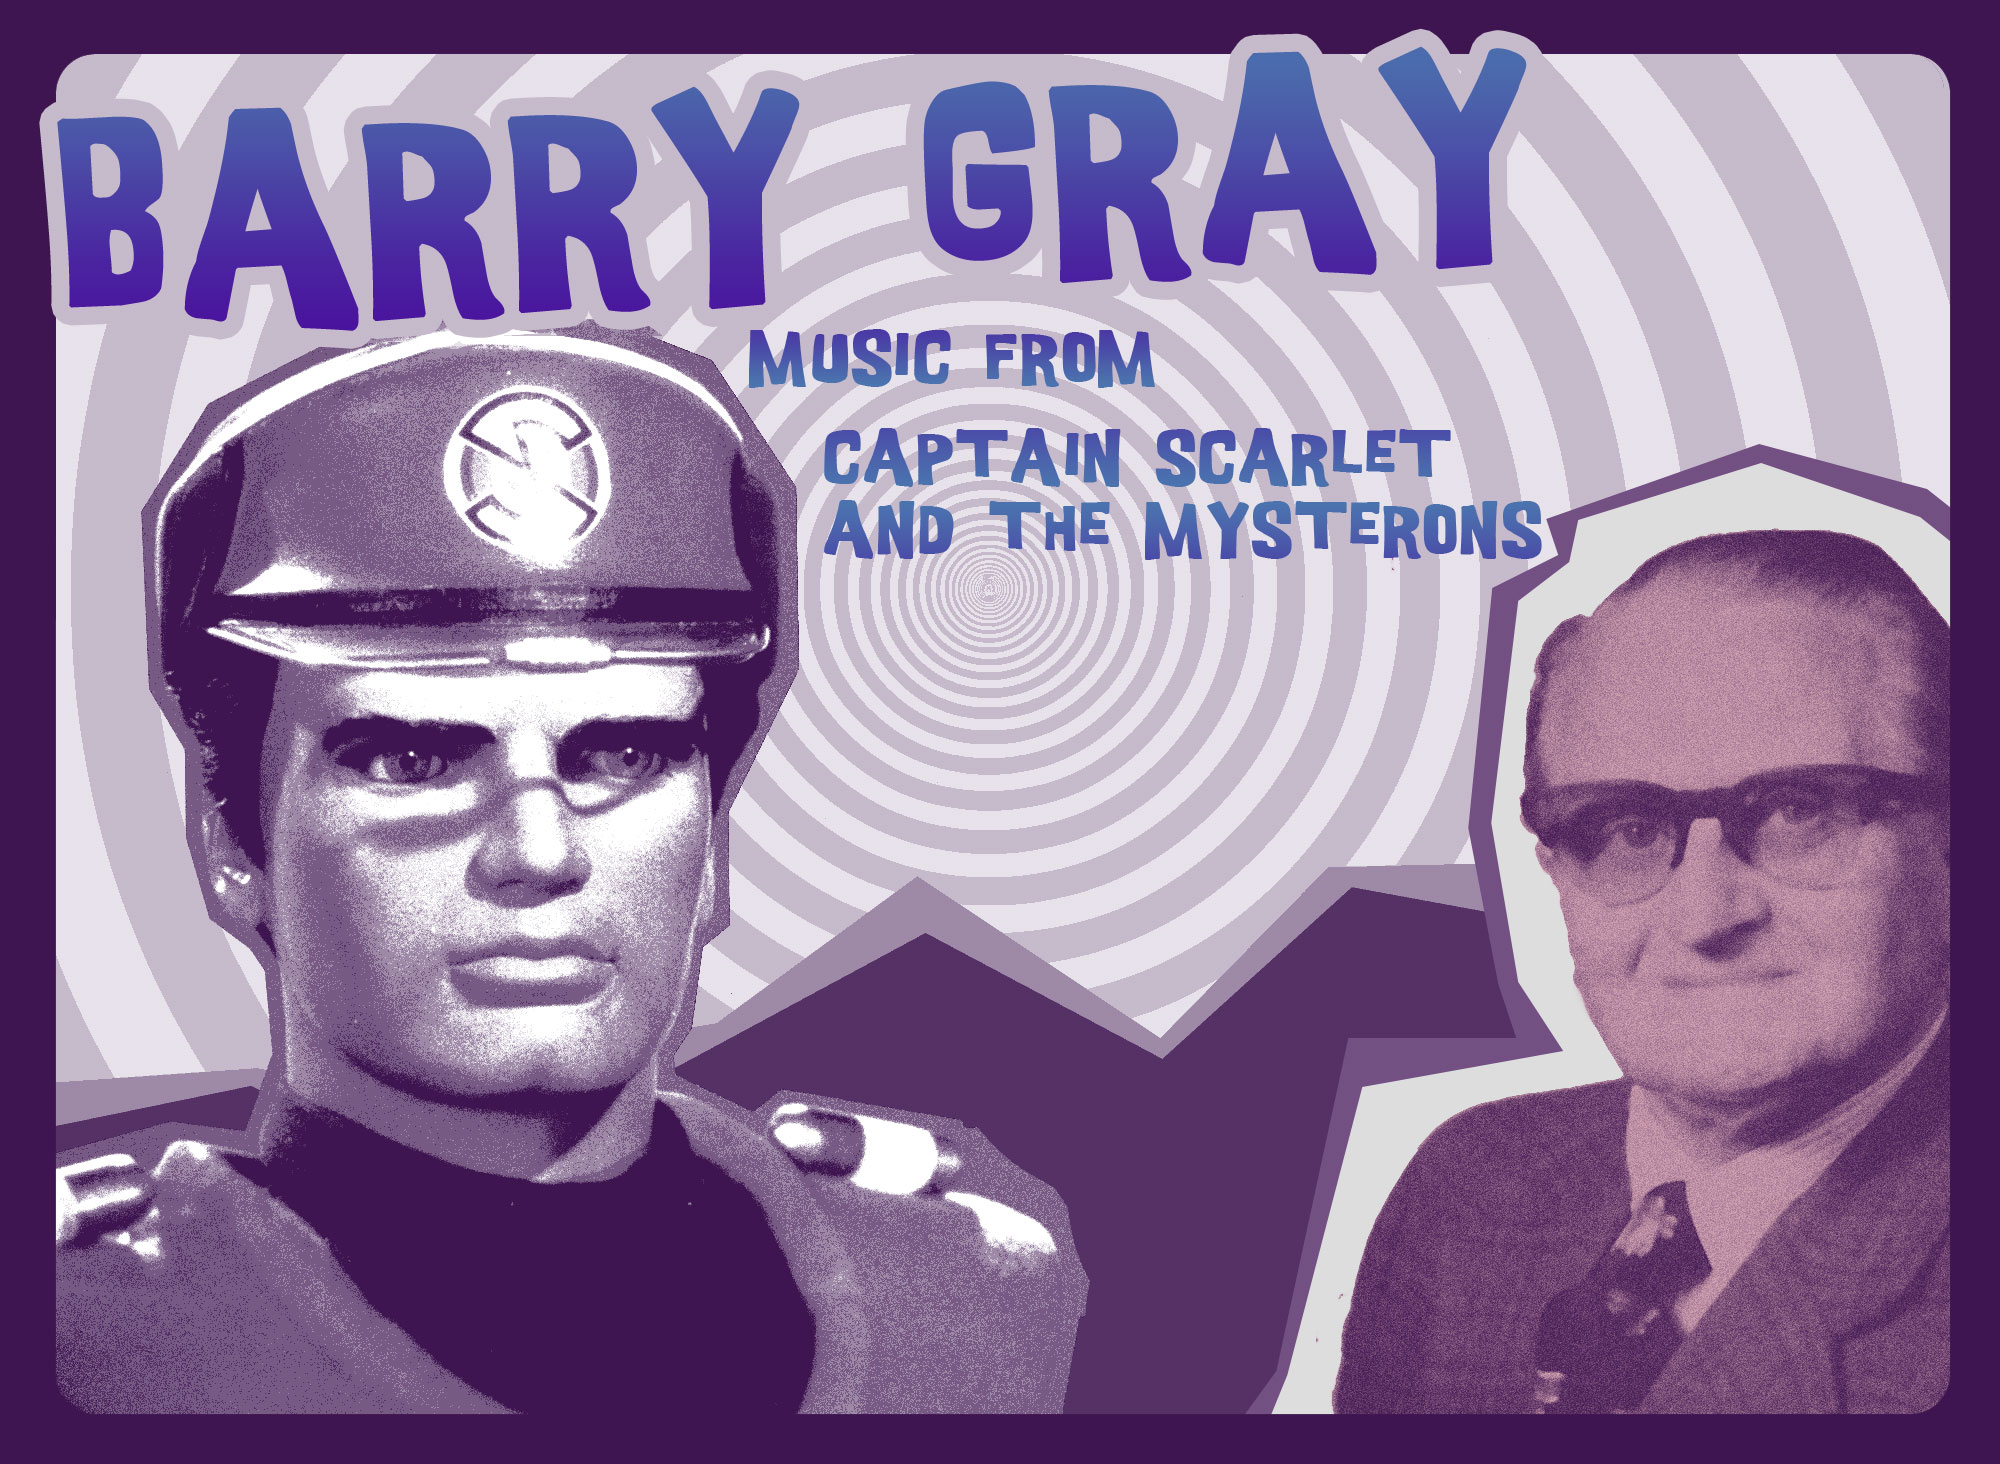 Barry Gray's Music from Captain Scarlet and the Mysterons